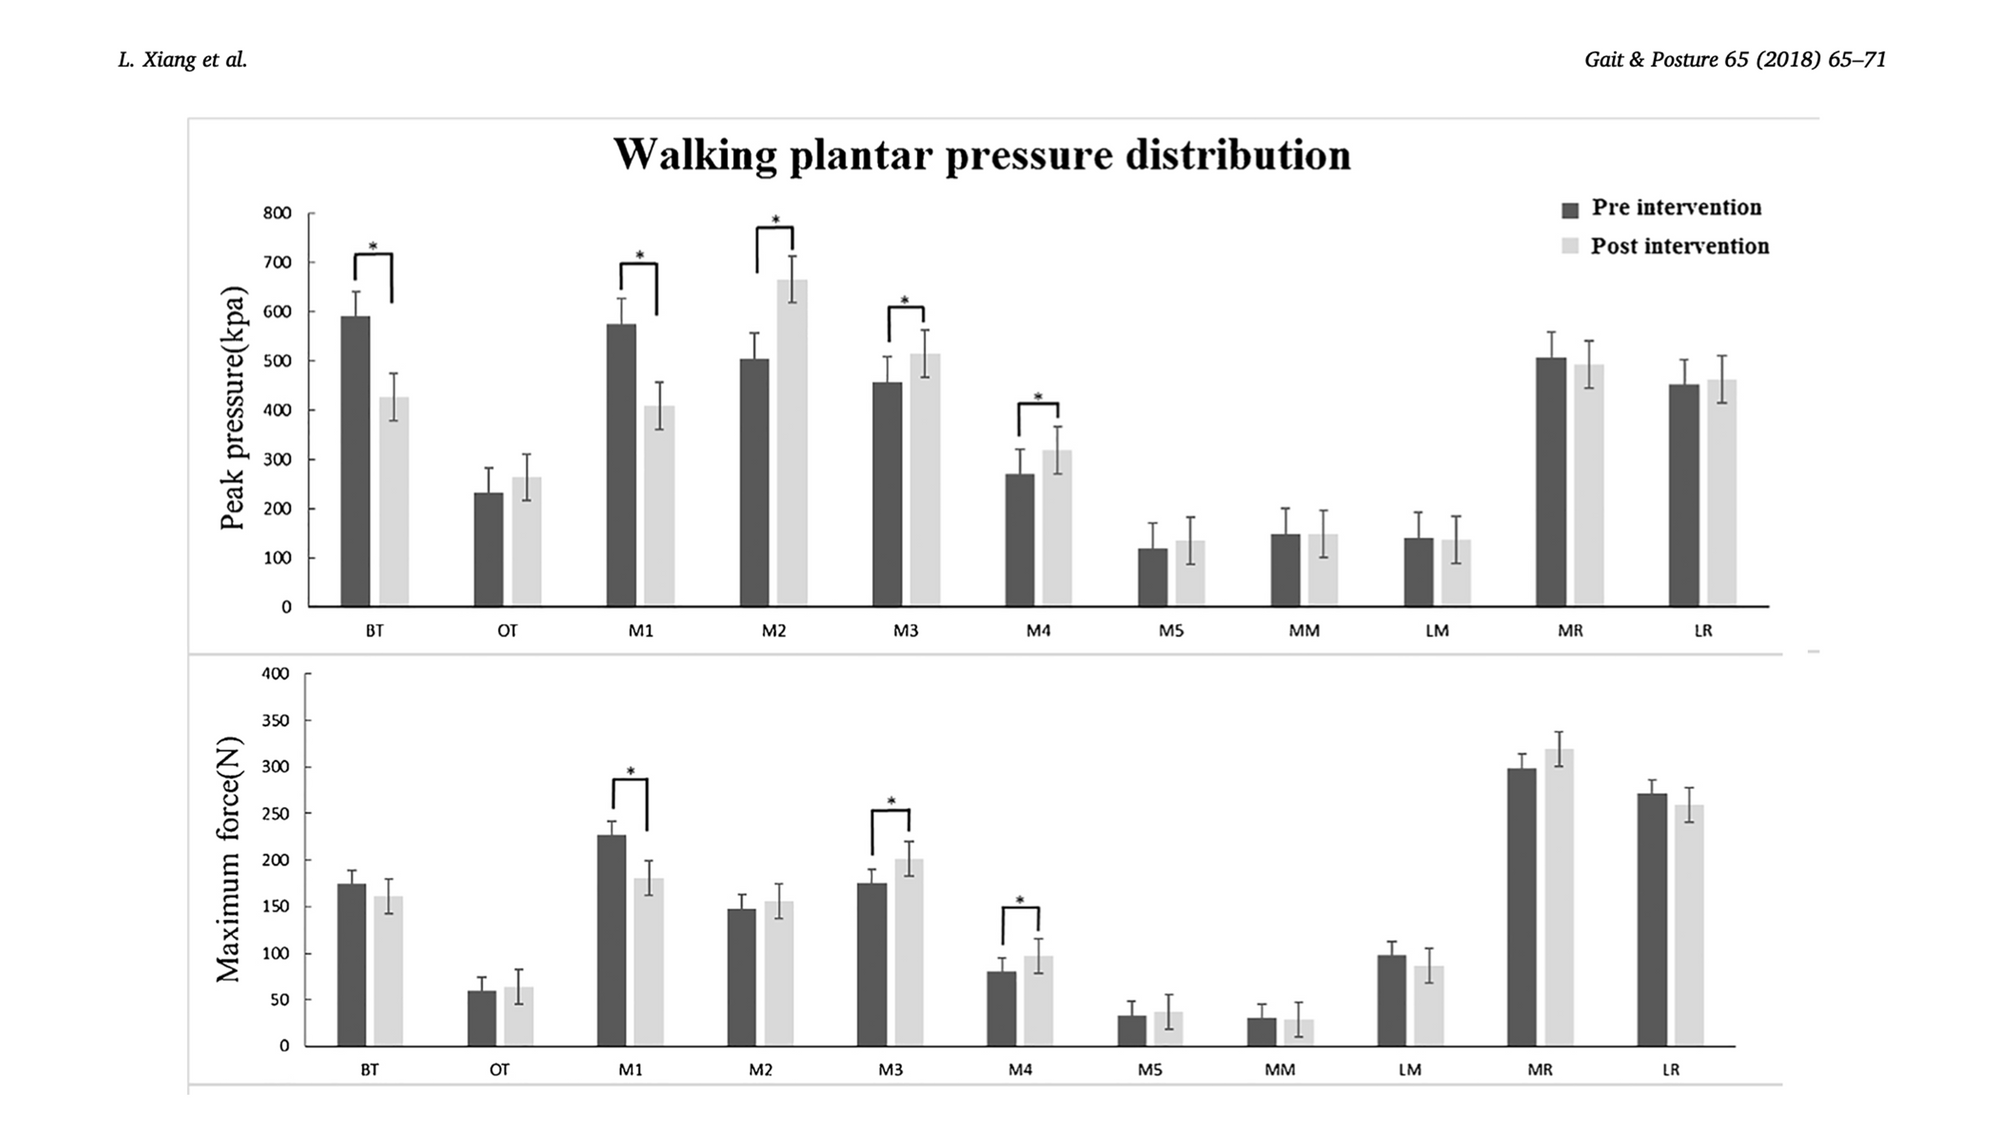 Minimalist shoes running intervention can alter the plantar loading